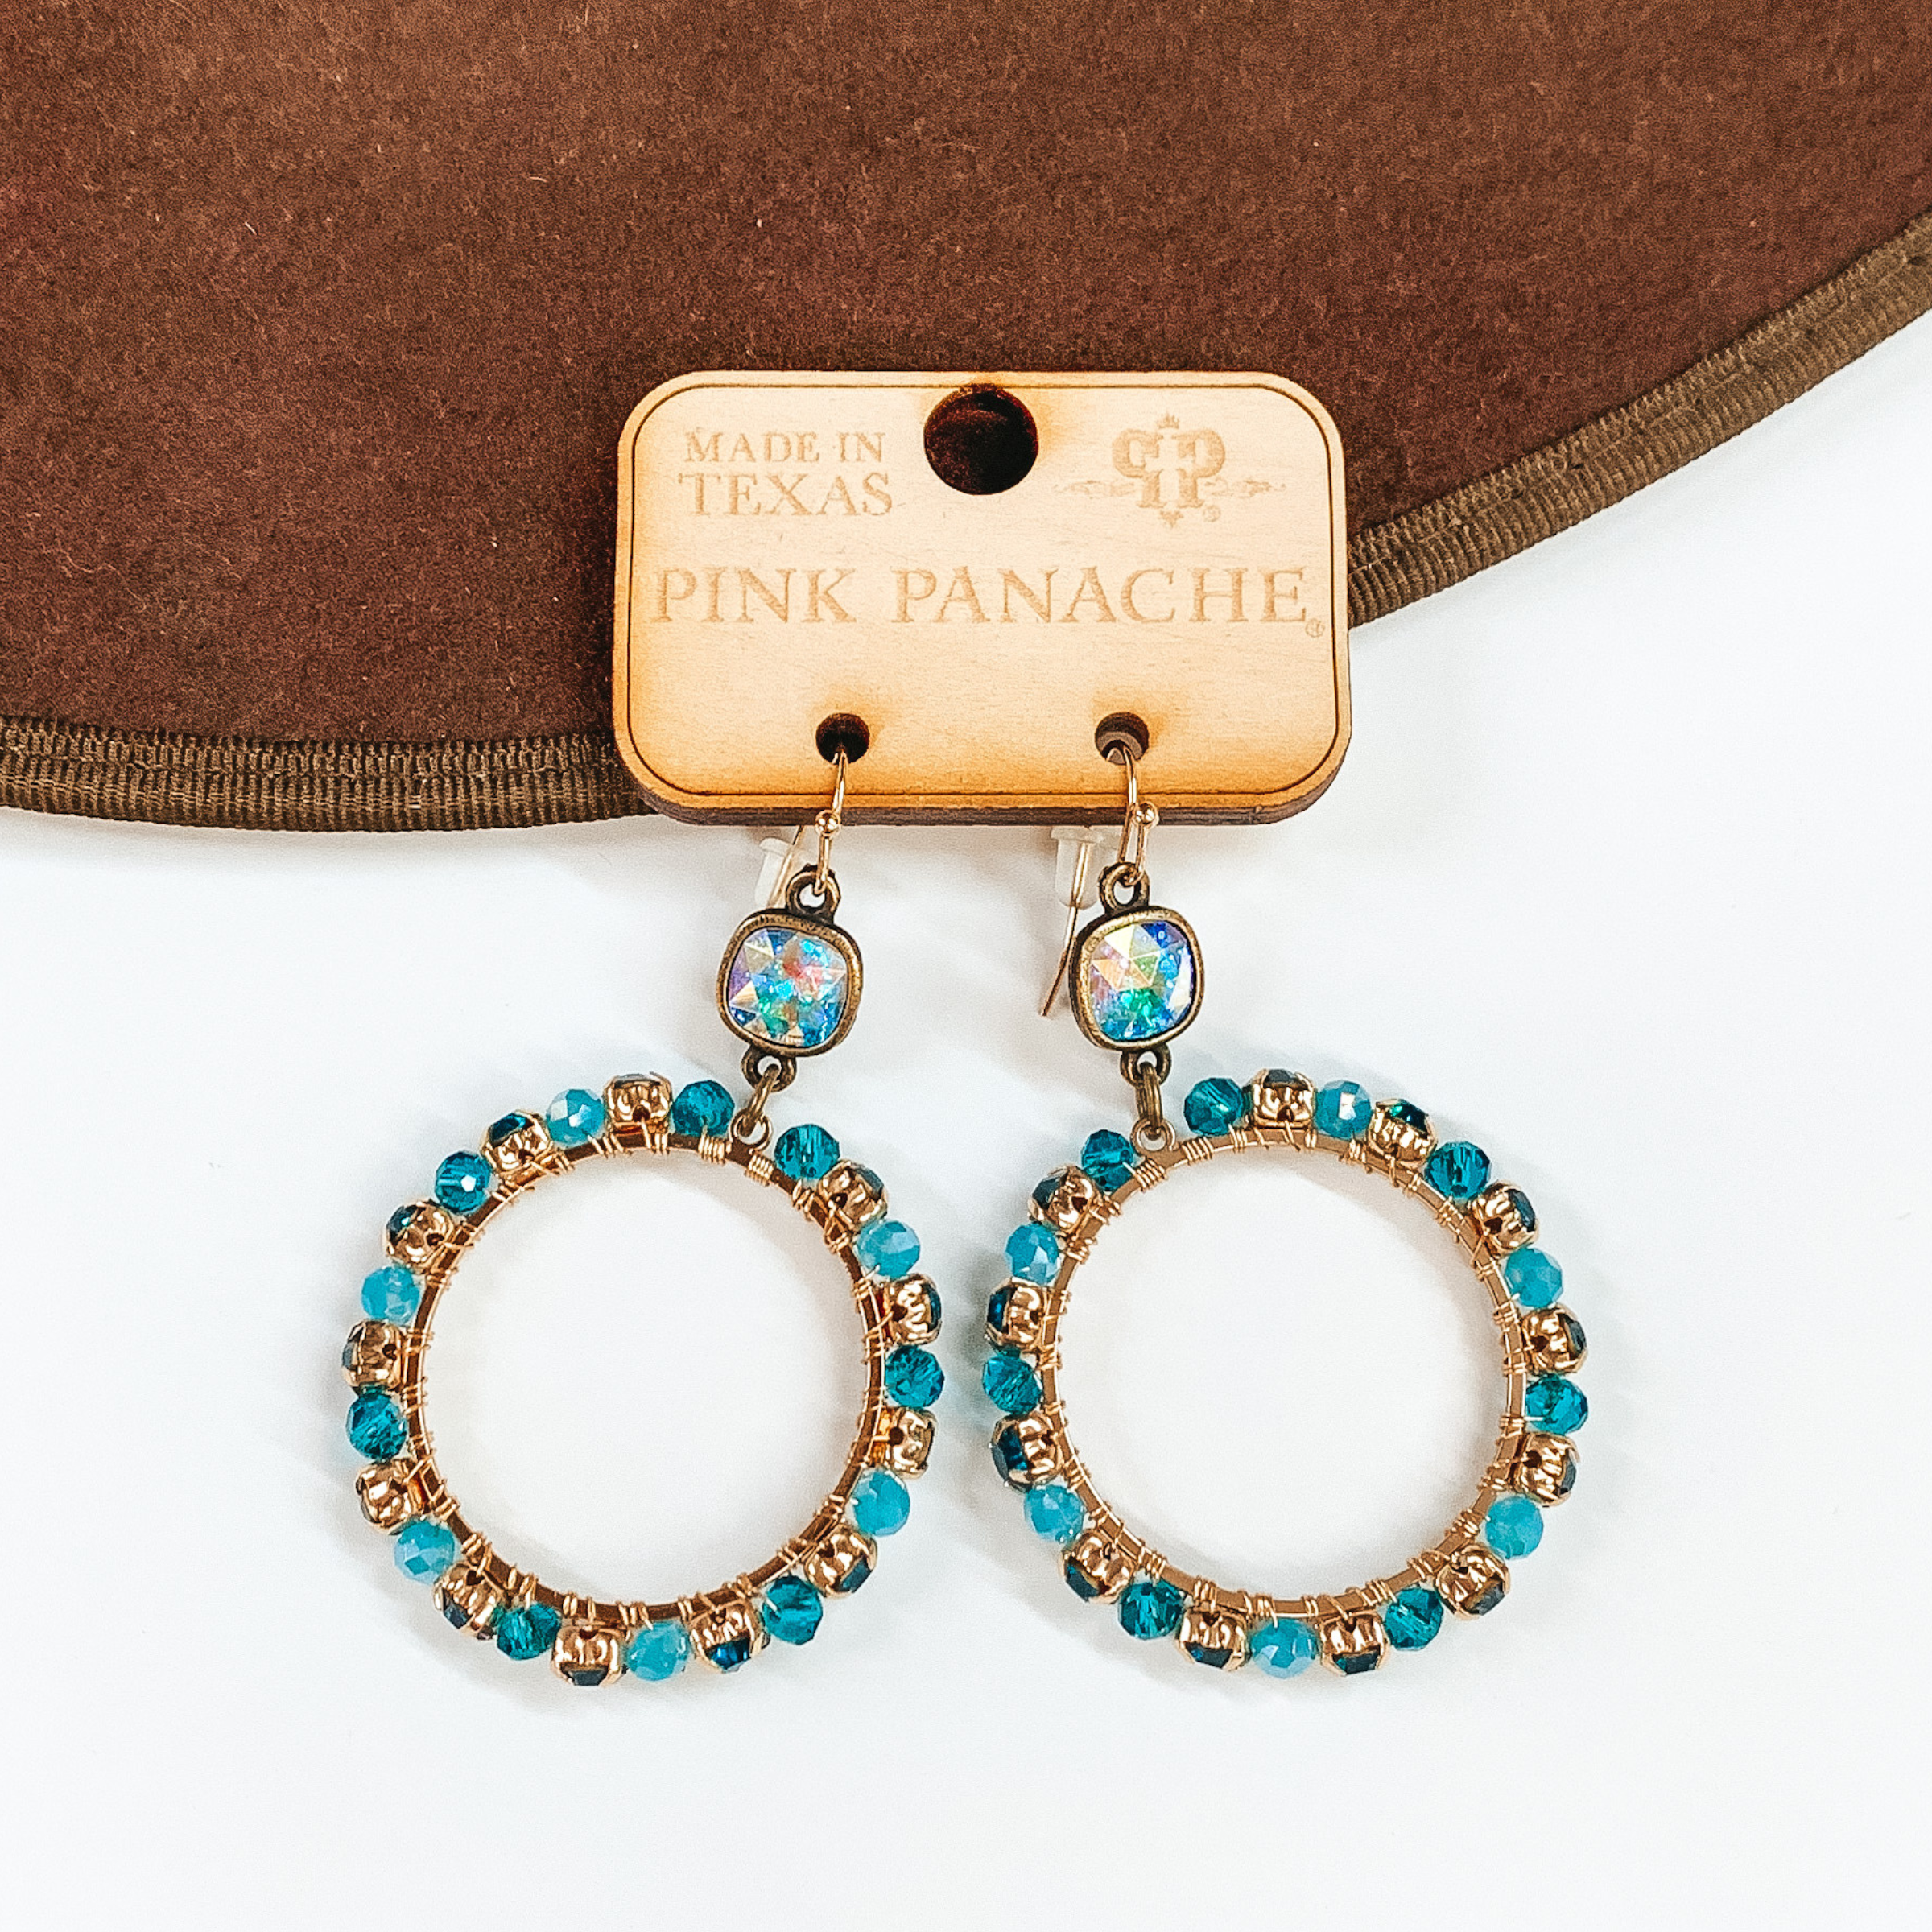 Pictured is a pair of circle hoop earrings. These earrings include gold fish hook earrings, ab cushion cut crystal connectors, and the hoop is gold with dark and light awua colored beads and crystals. These earrings are pictured laying partially on a brown hat brim on a white background.  